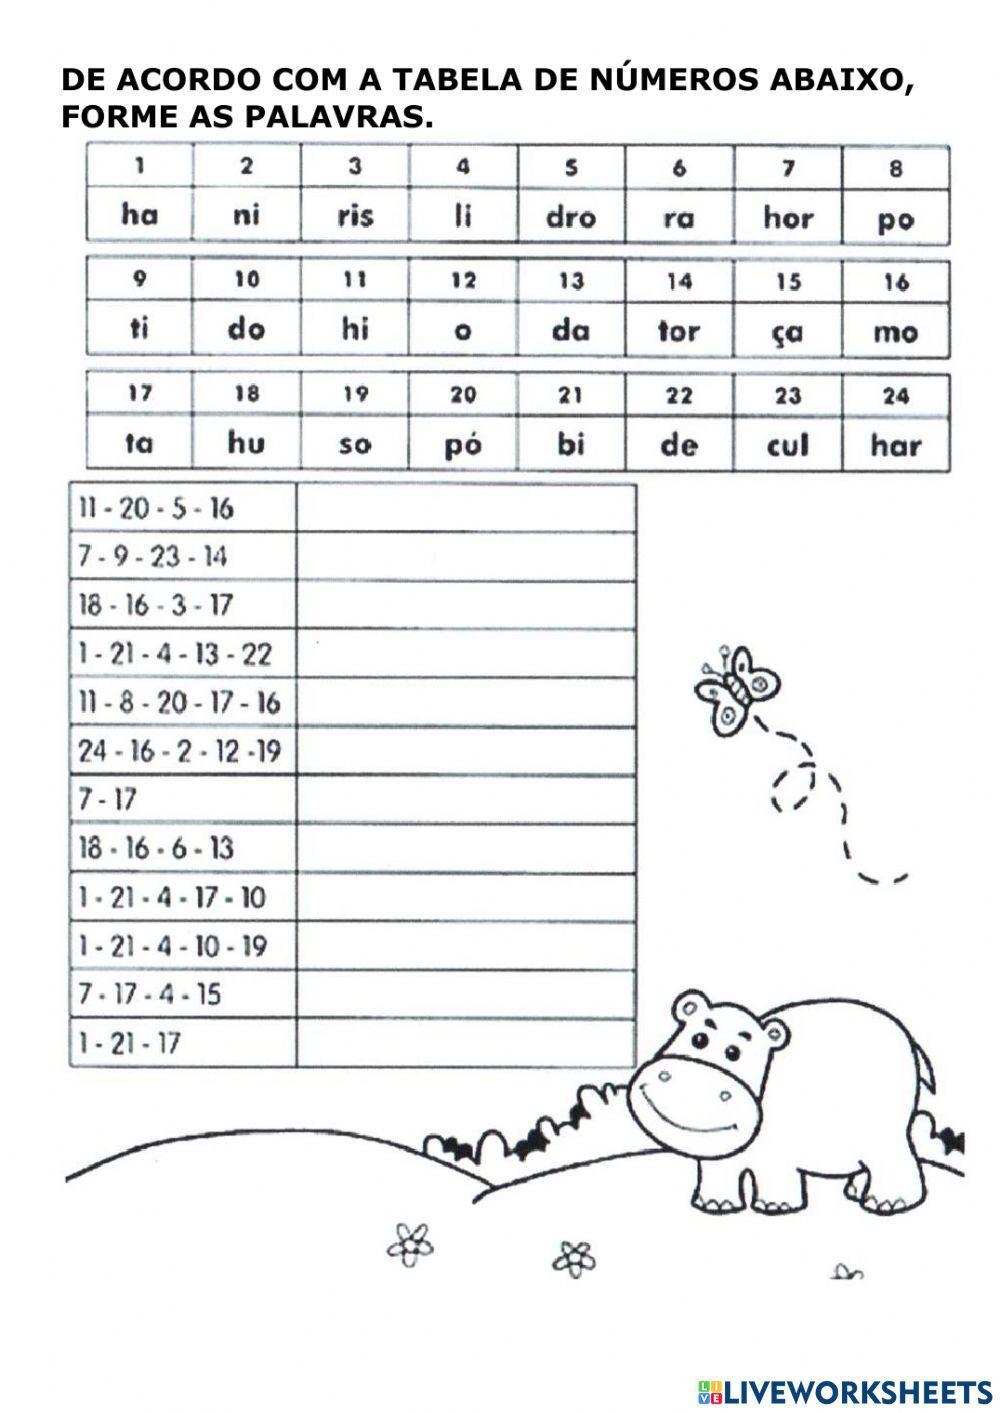 Formar palavras online activity for 1º AO 4º ANO | Live Worksheets